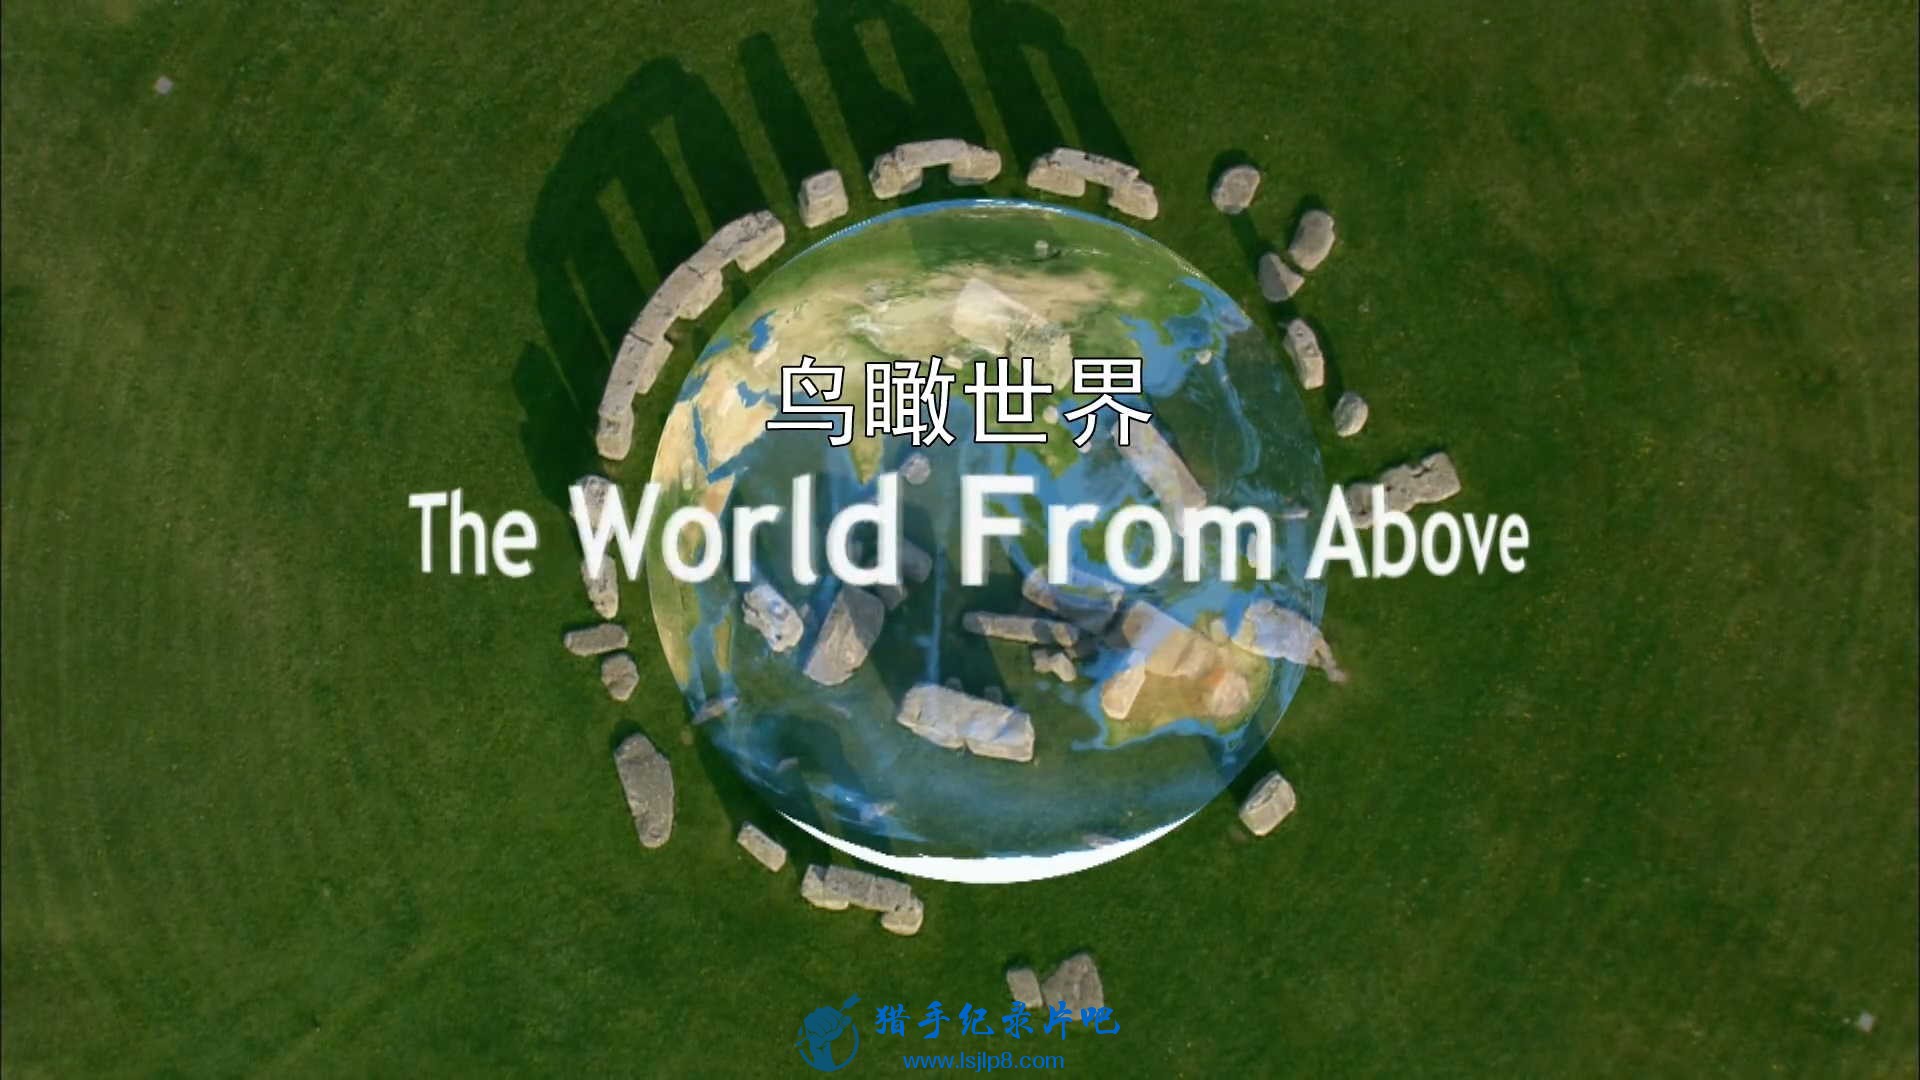 The.World.from.Above.2010.S01E01.1080p.WEB-DL.H264.AAC-TJUPT.mp4_20200521_102921.jpg